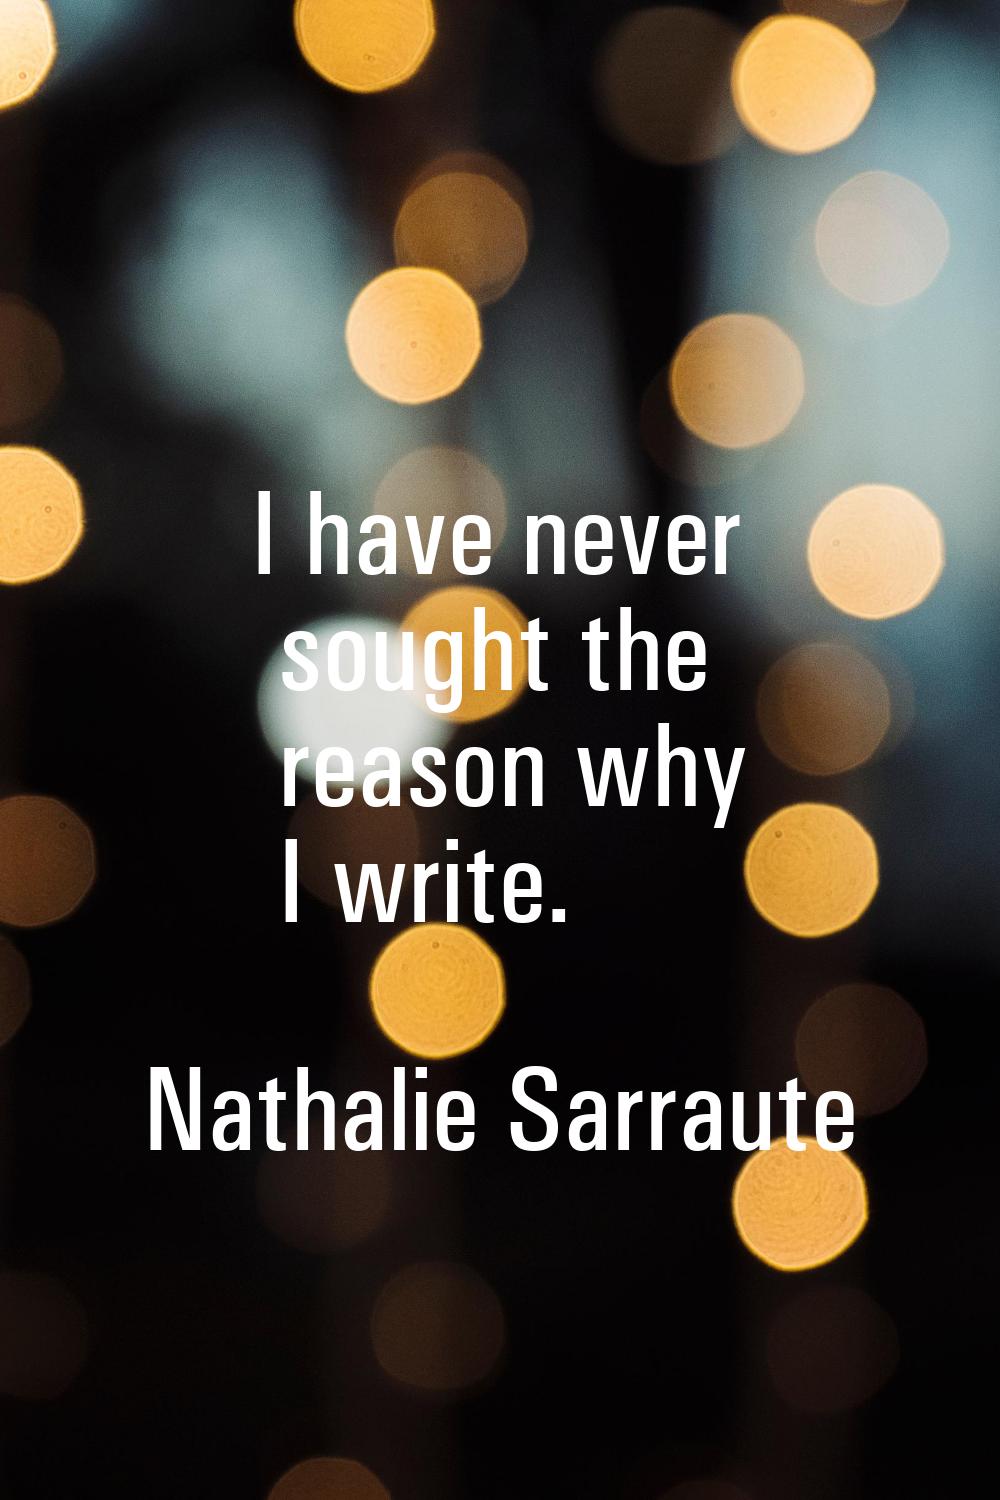 I have never sought the reason why I write.